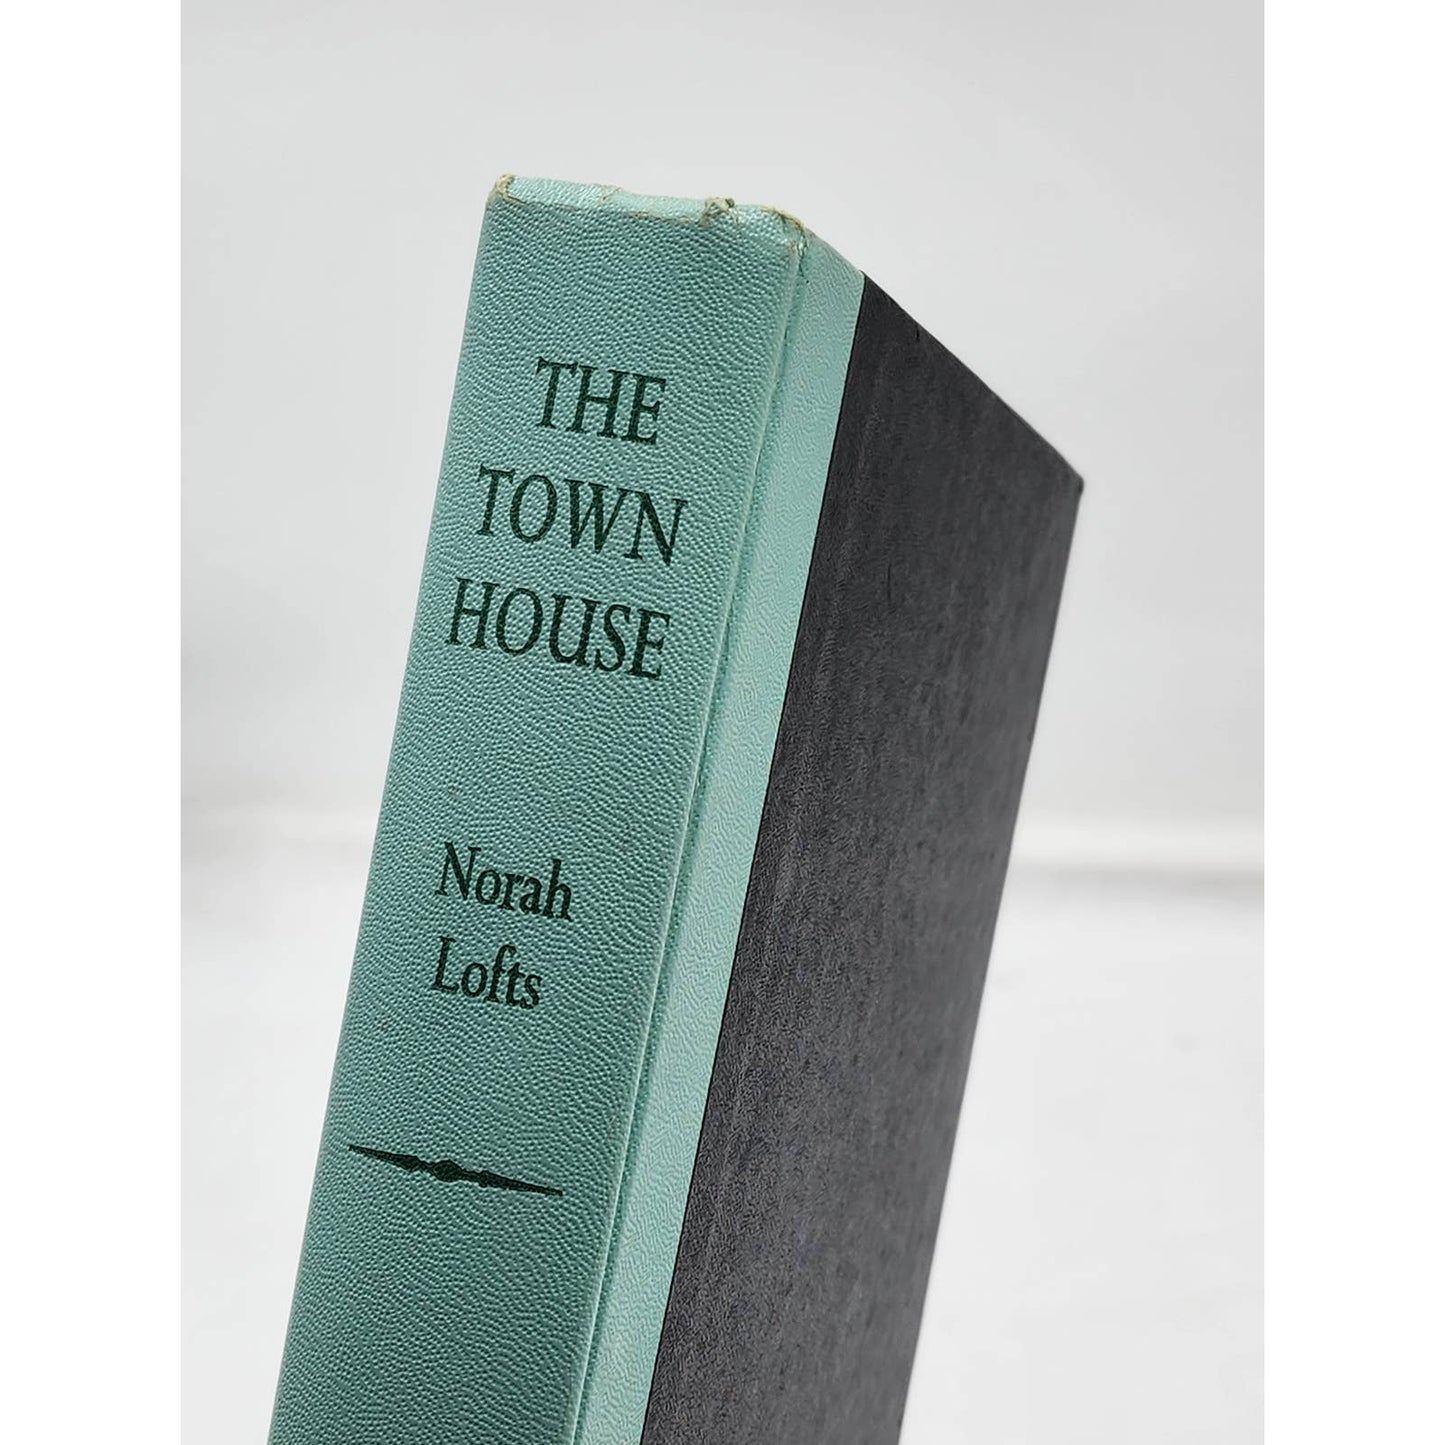 The Town House By Norah Lofts Suffolk Trilogy Historical Novel Vintage 1959